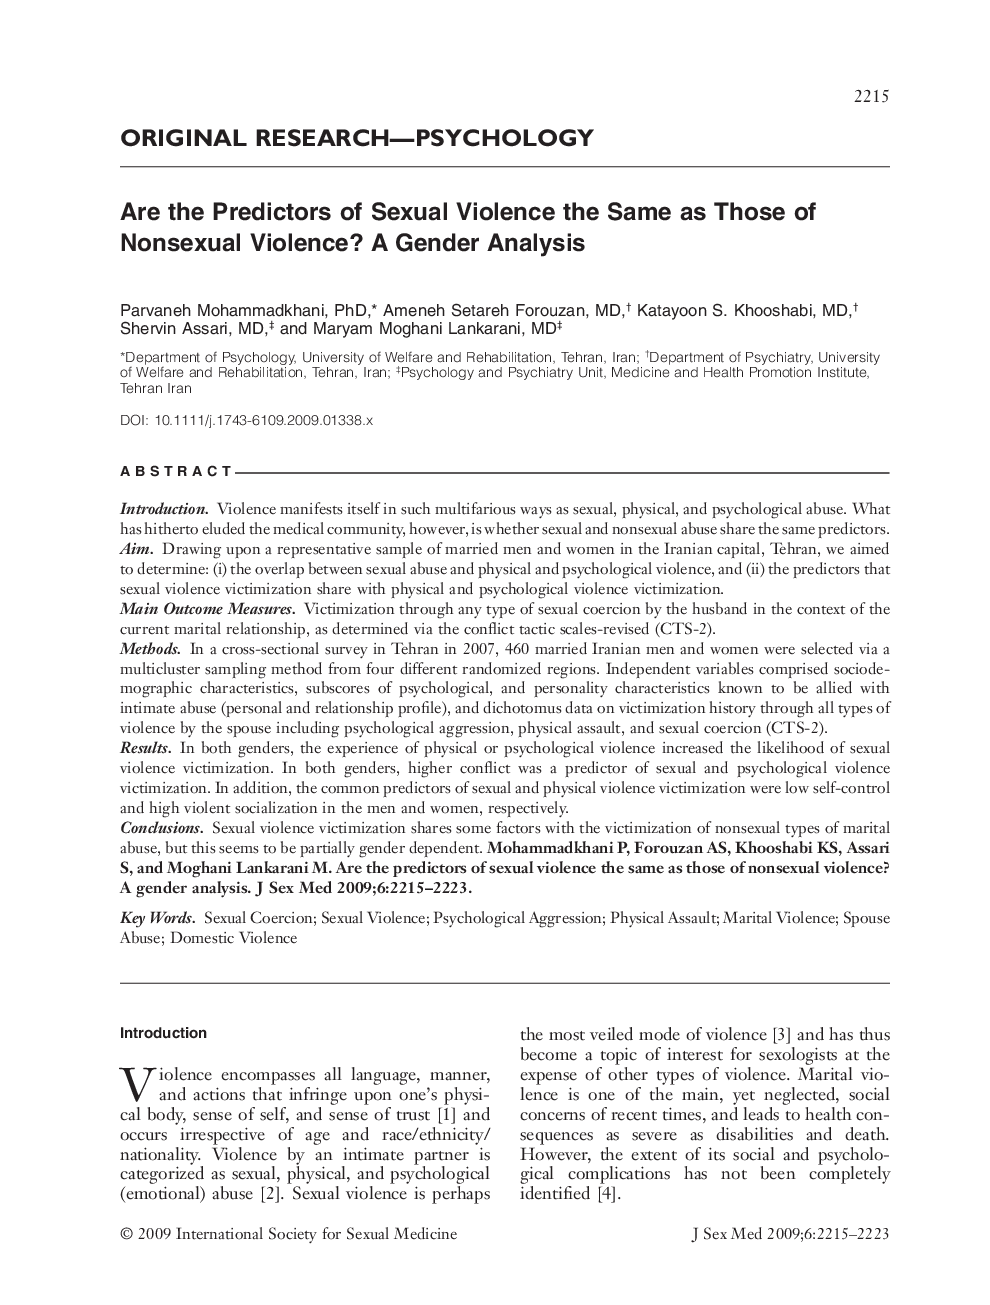 Are the Predictors of Sexual Violence the Same as Those of Nonsexual Violence? A Gender Analysis